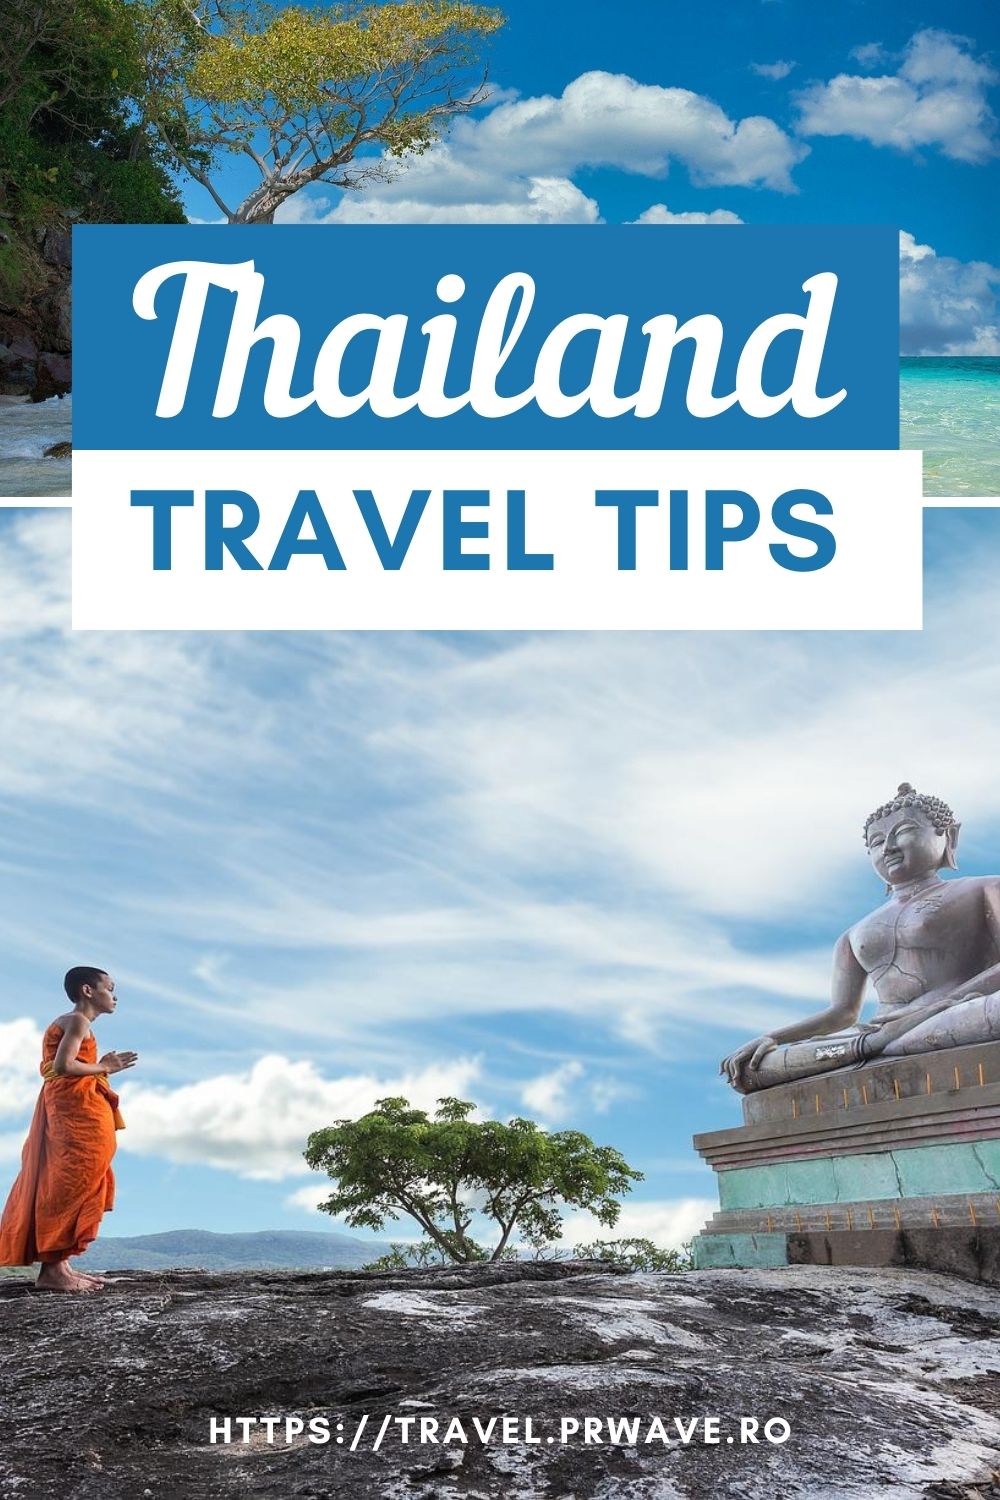 Planning a Thailand vacation soon? Read this article with the best Thailand travel tips - and useful things to know before visiting Thailand. #thailand #thailandtrip #thailandtravel #asiatravel #thailandthingstoknow #traveldestinations #asia #traveltips